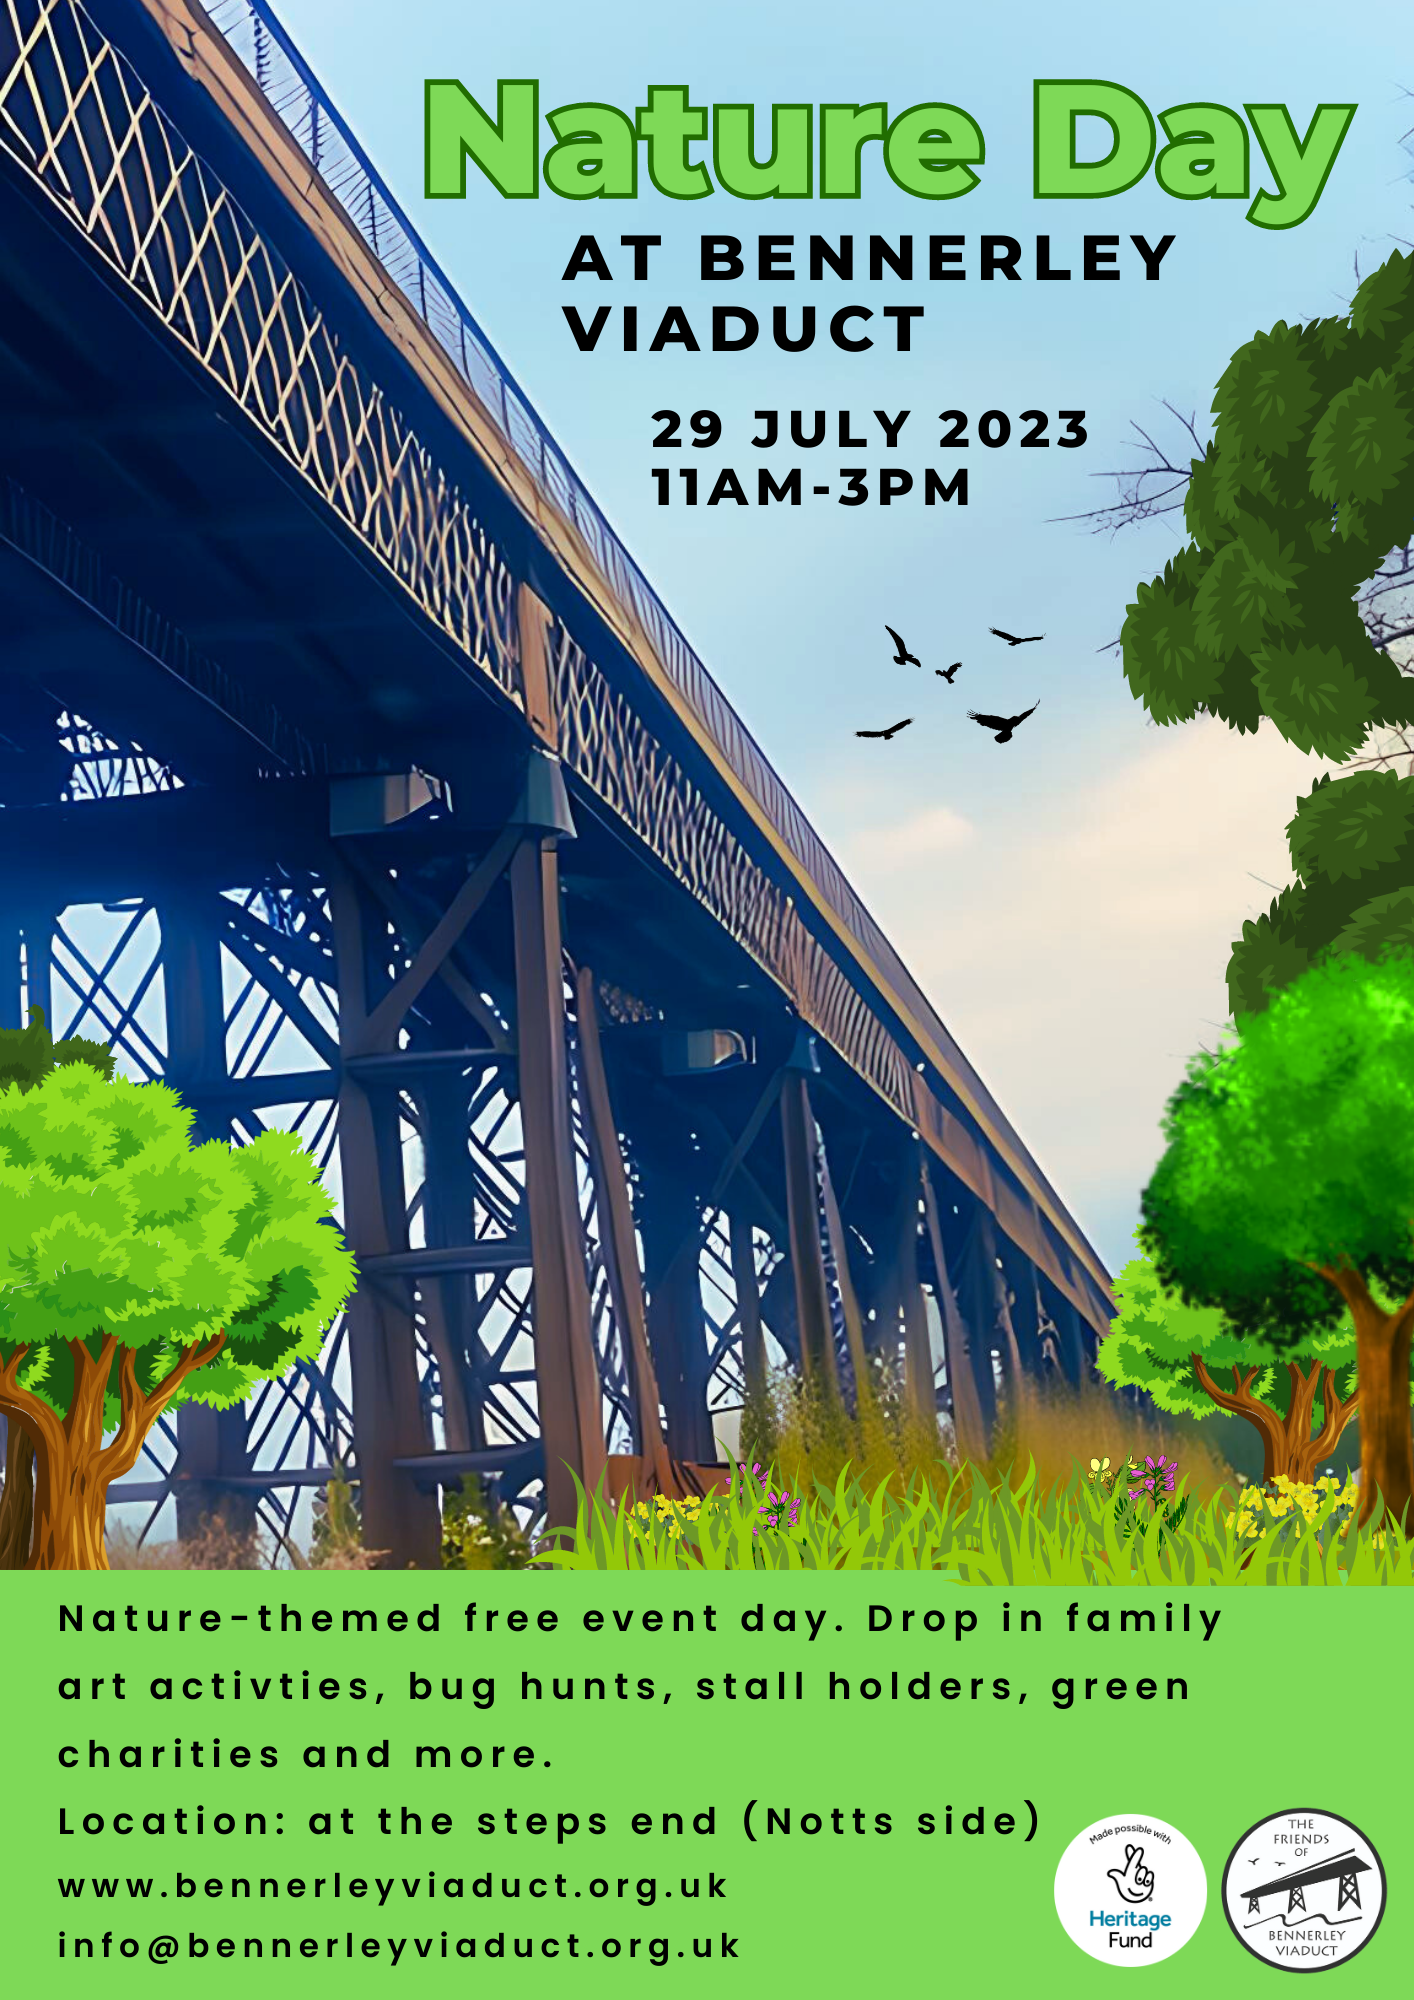 Nature Day at Bennerley Viaduct: 29 July